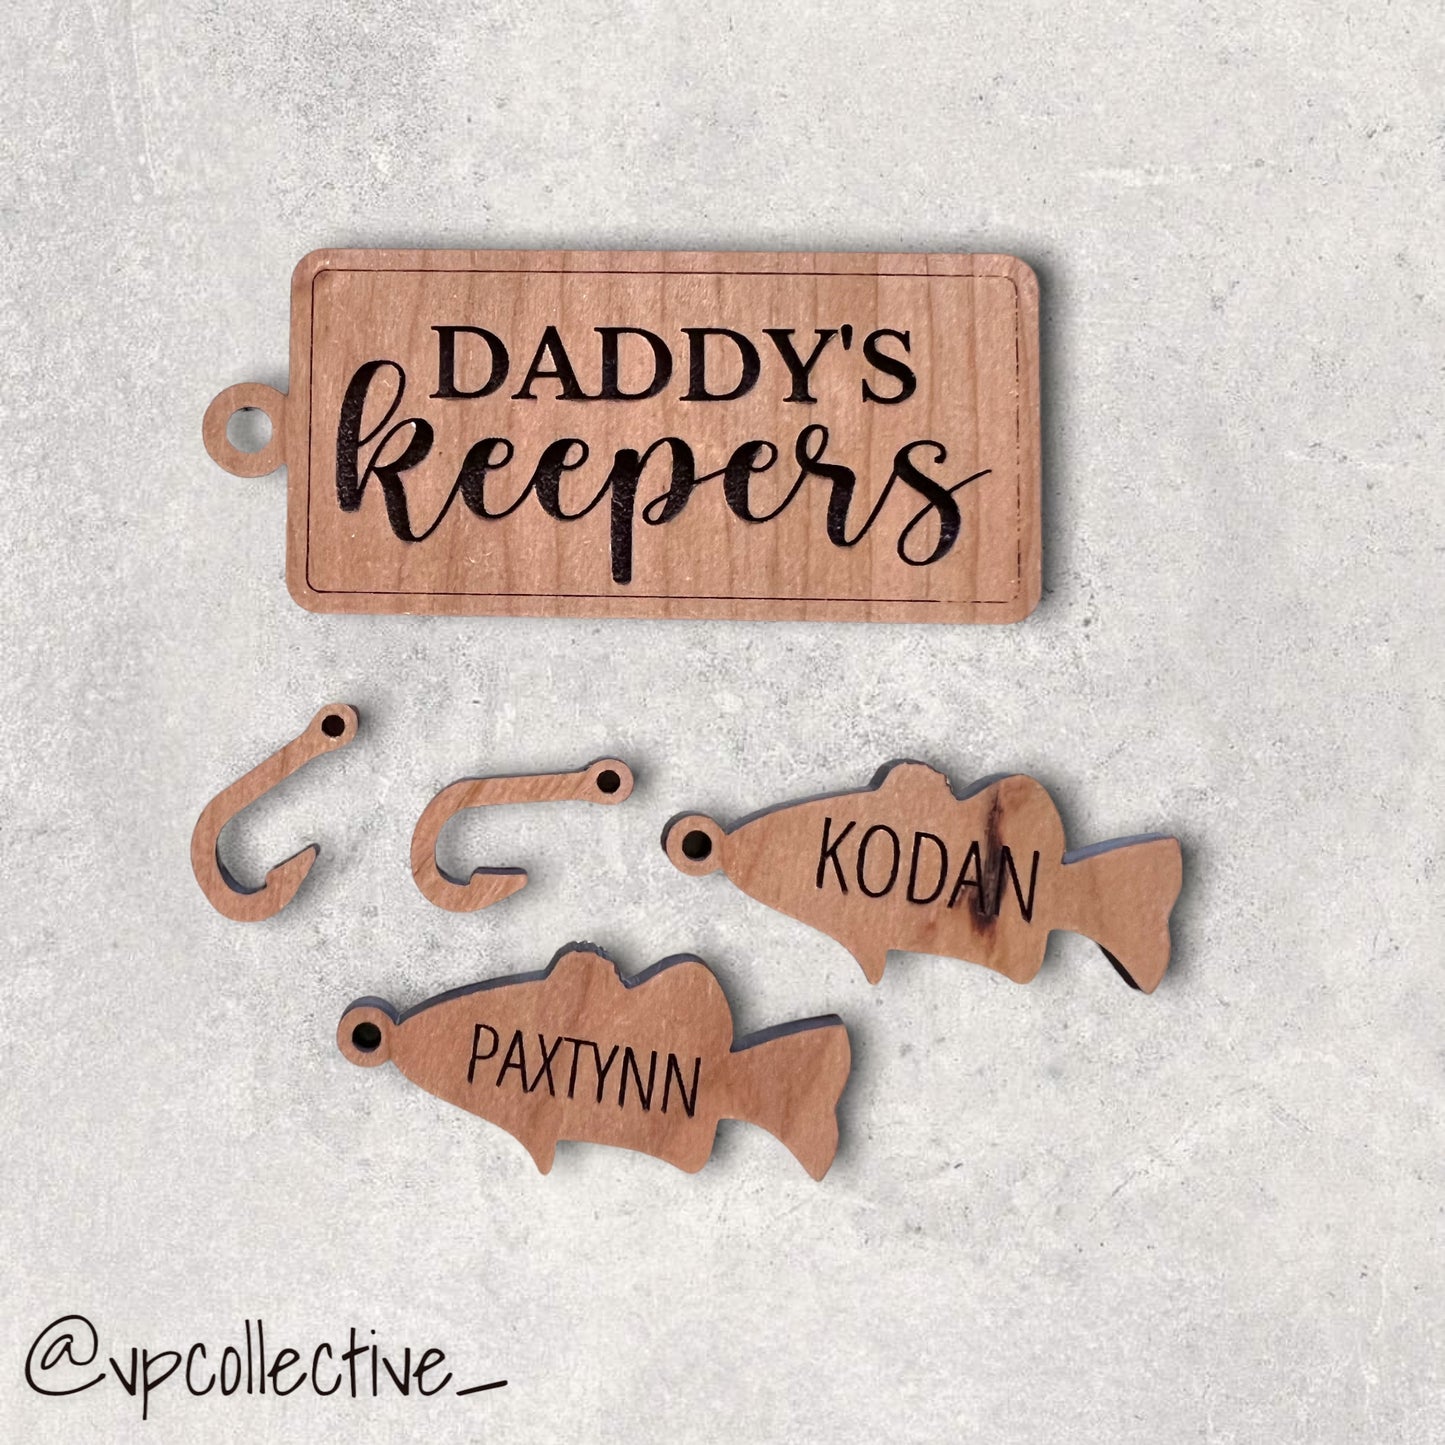 Daddy’s Keepers Keychain